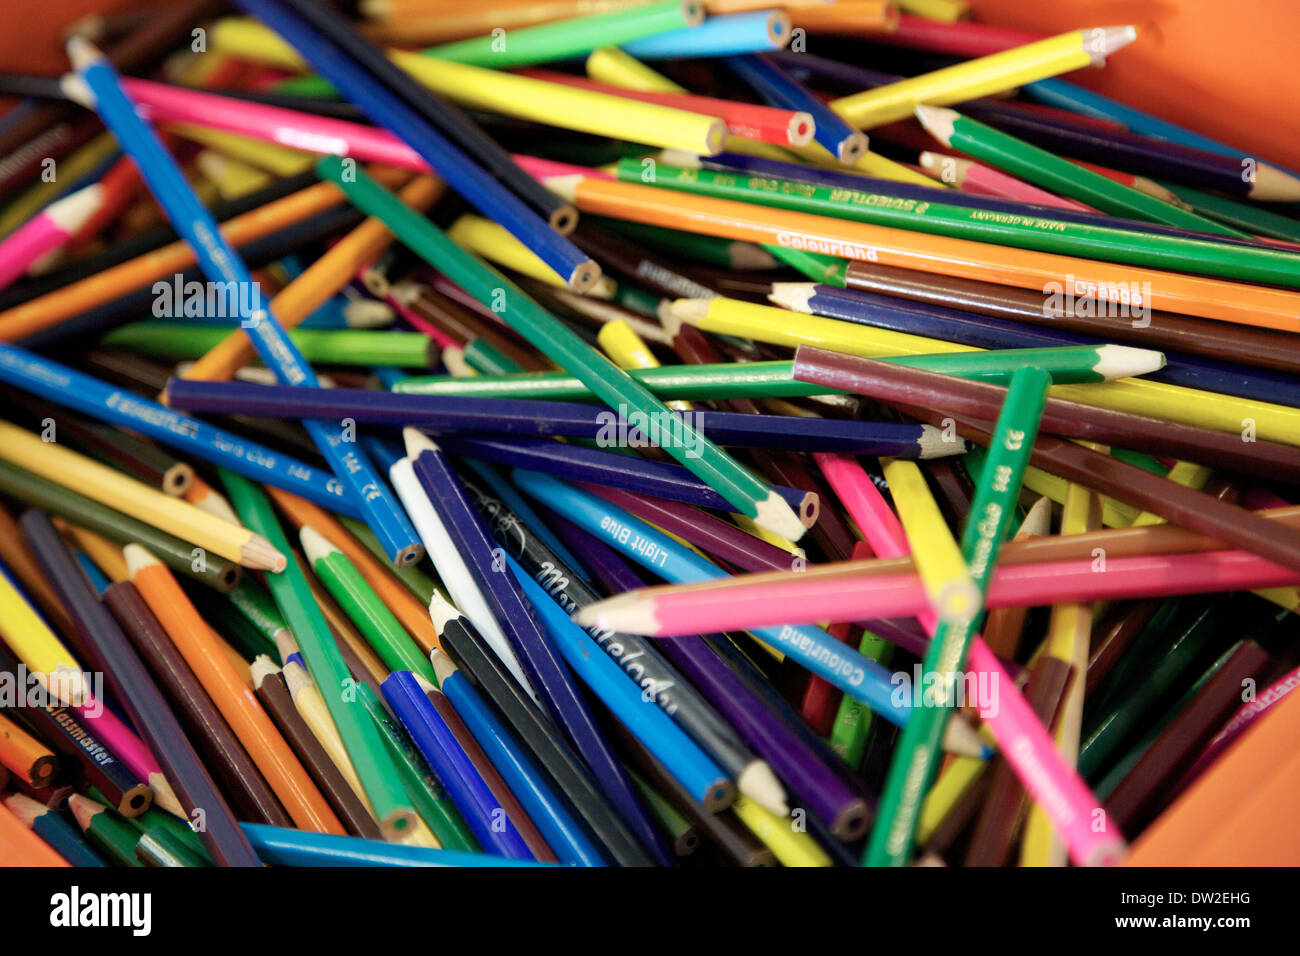 A pile of coloured colored pencils in a school classroom Stock Photo